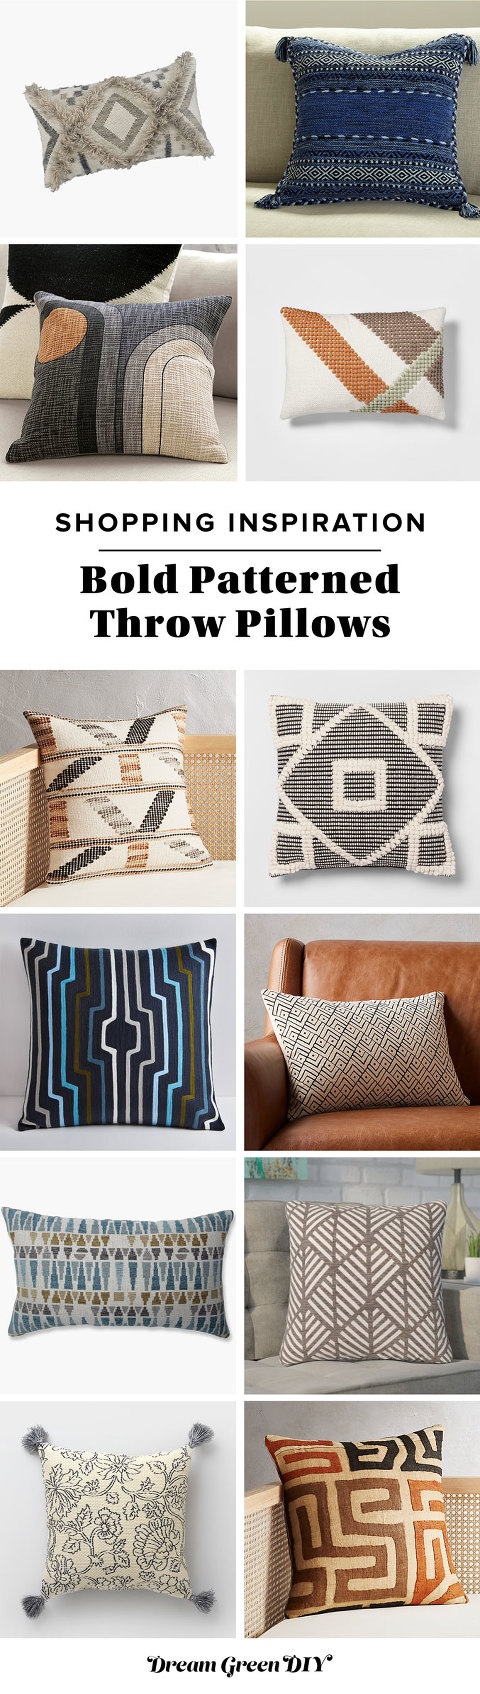 12 Bold Patterned Throw Pillows